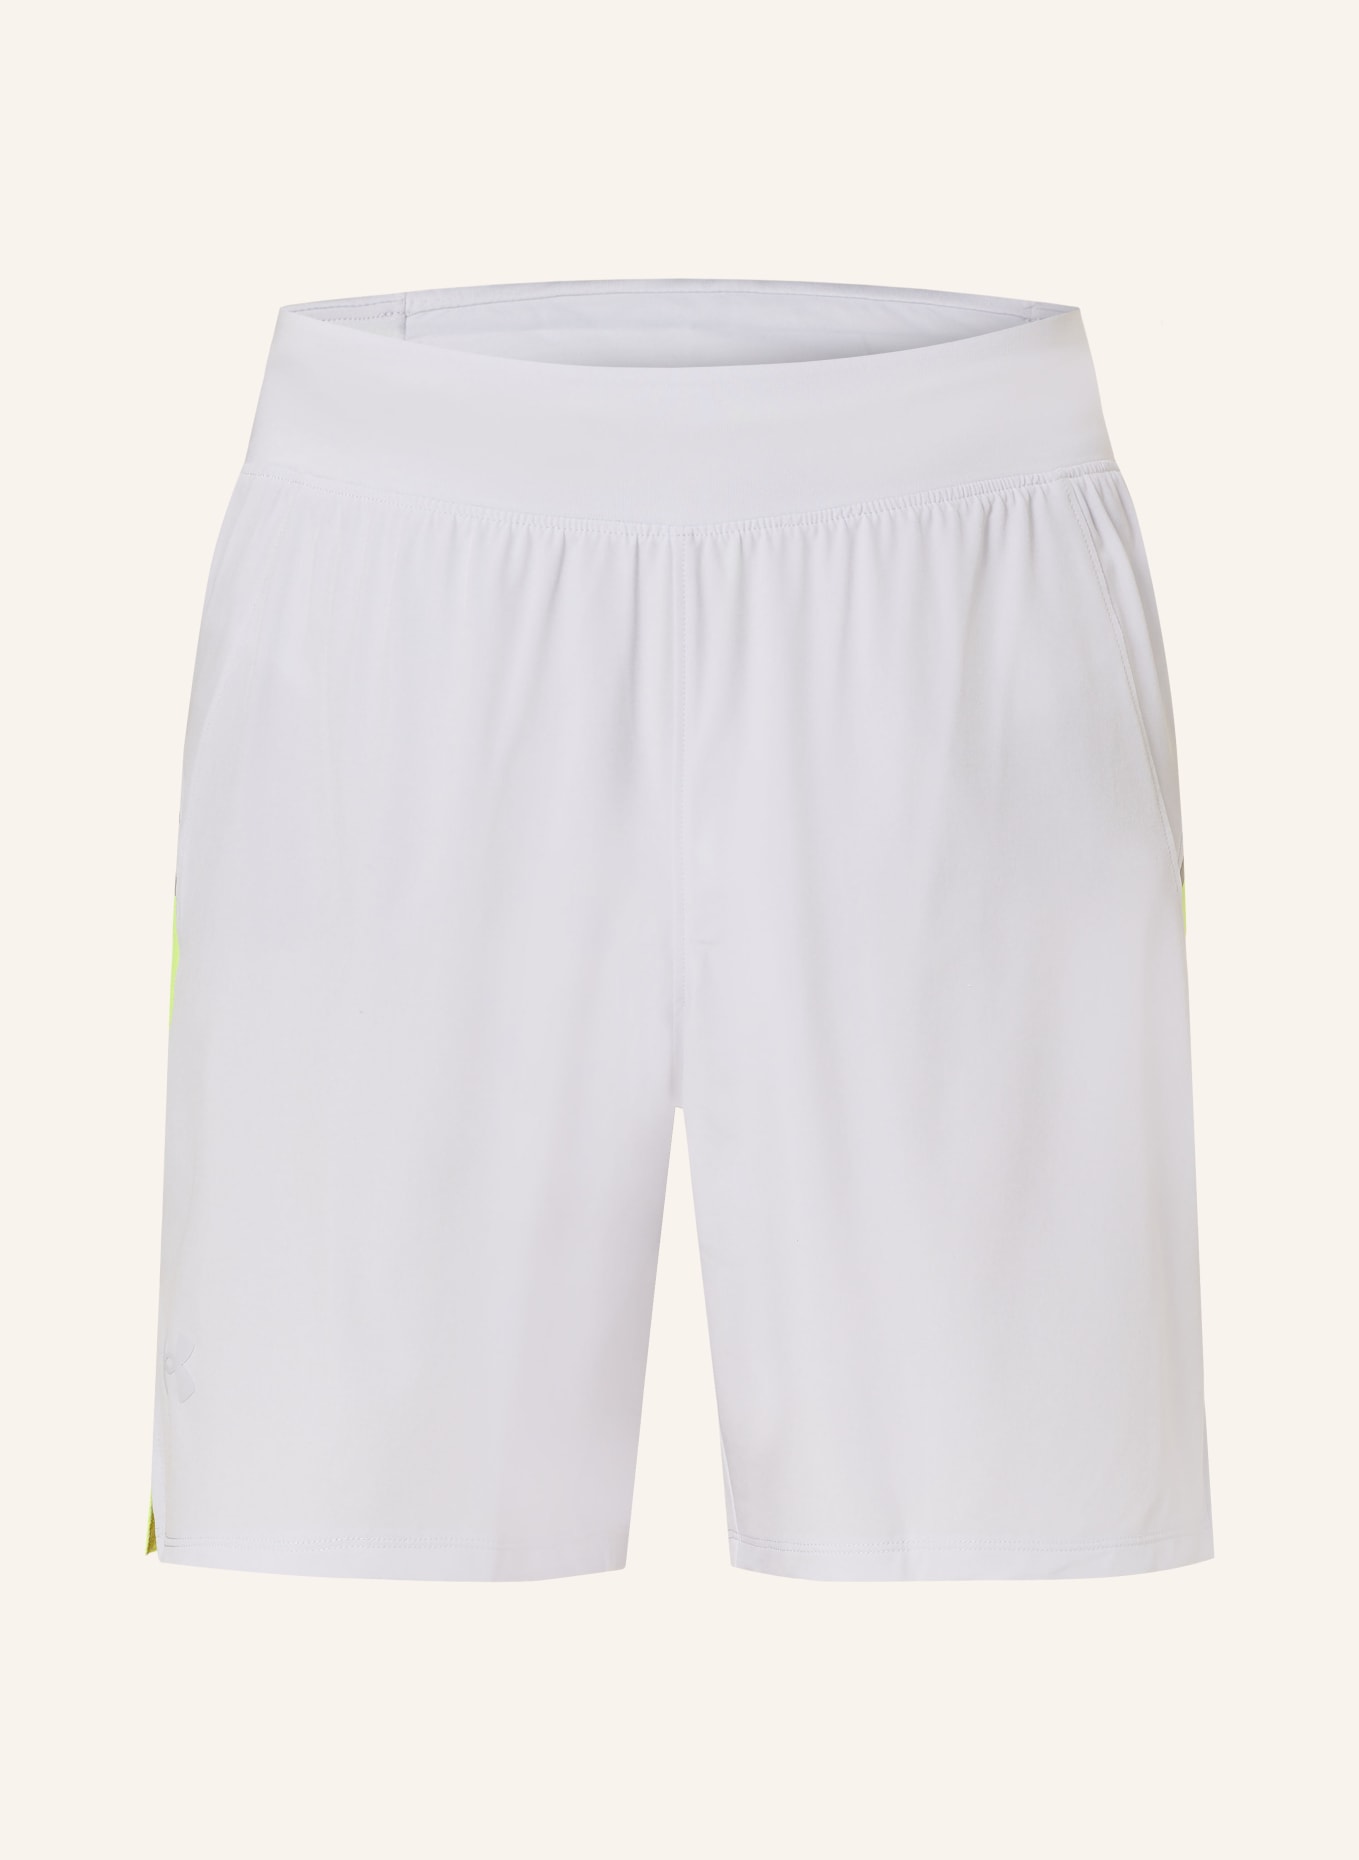 UNDER ARMOUR 2-in-1 running shorts UA LAUNCH ELITE, Color: LIGHT GRAY/ NEON YELLOW (Image 1)